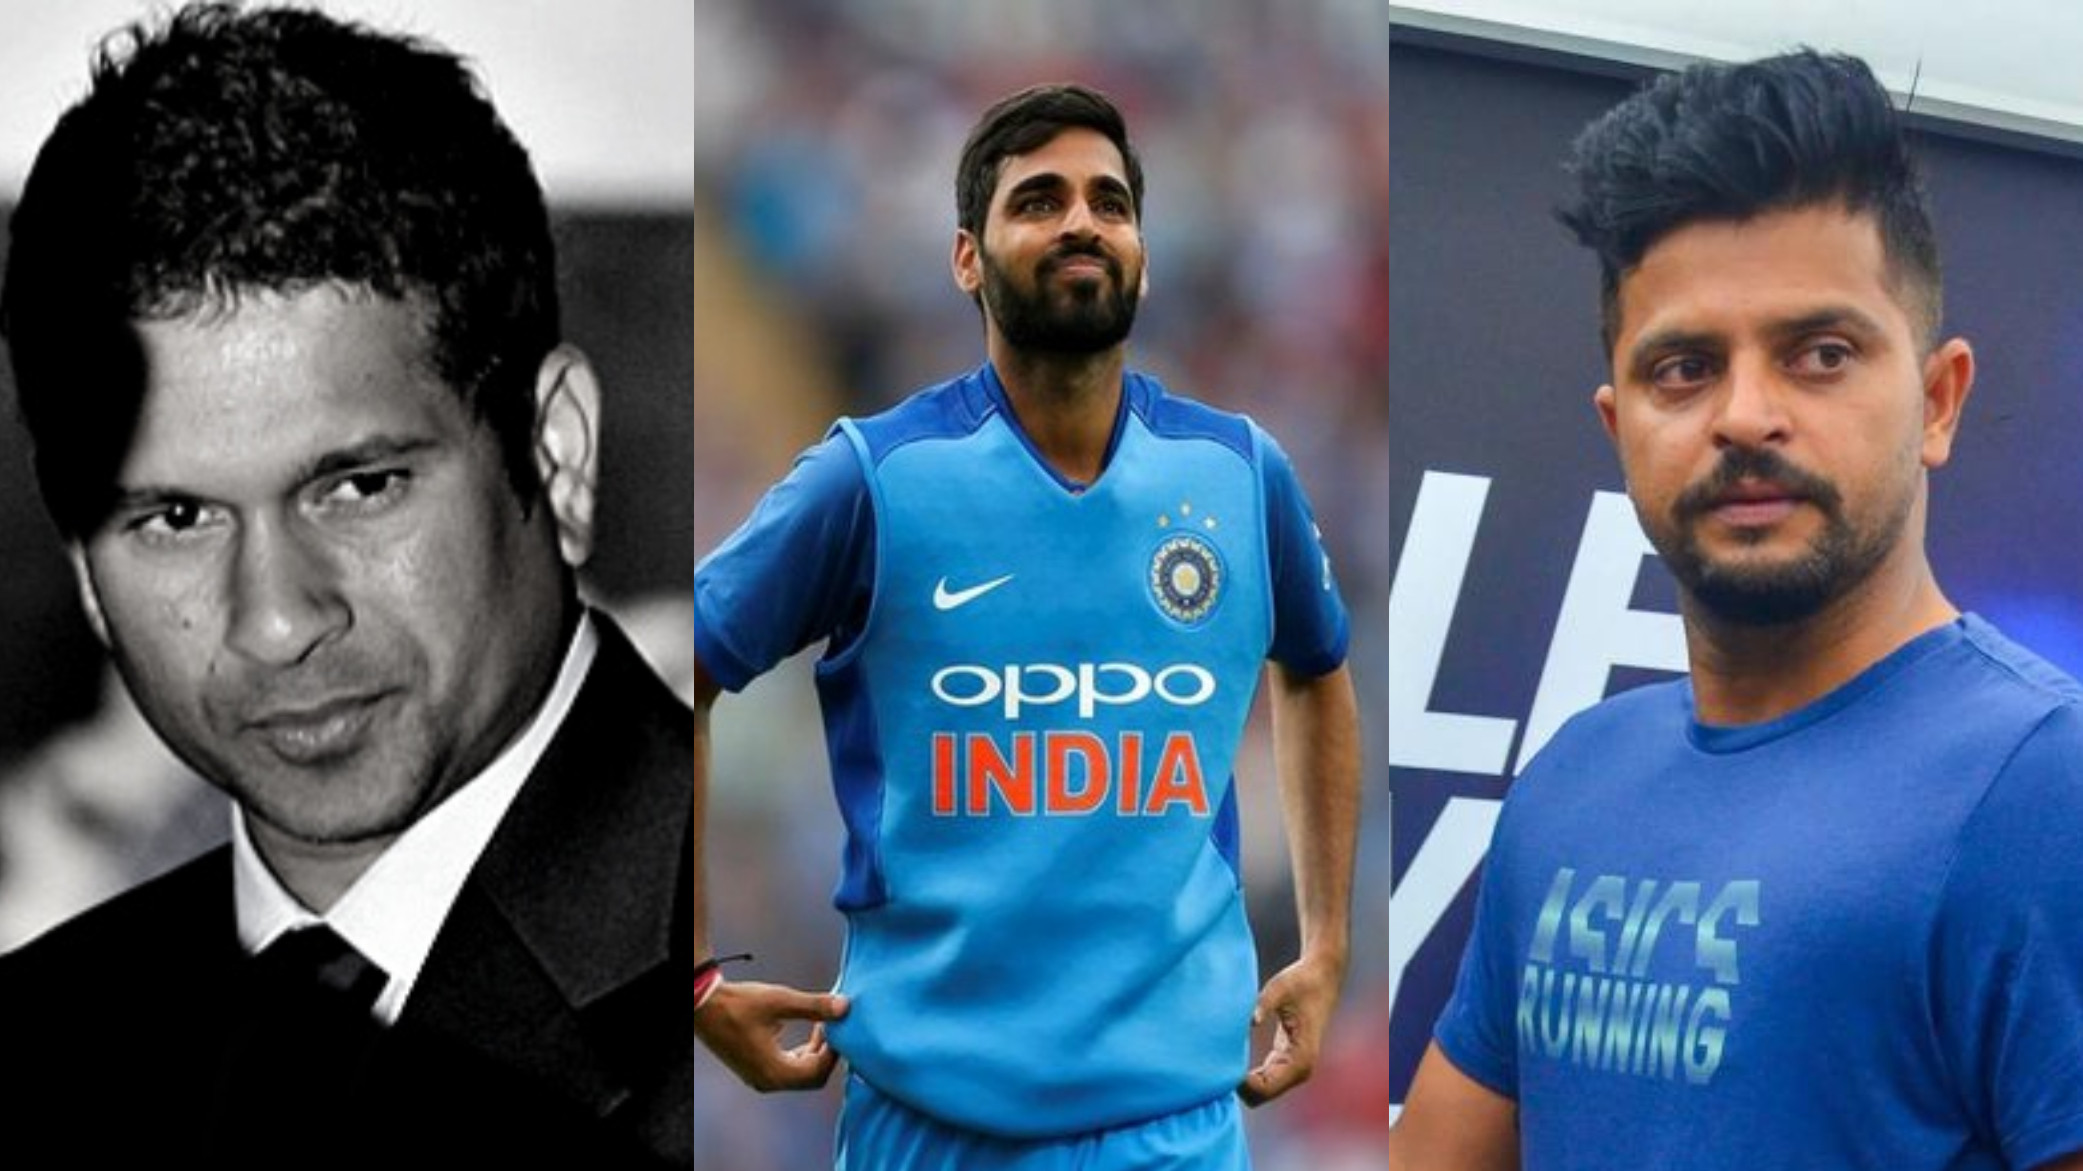 Bhuvneshwar Kumar's father passes away due to cancer, cricket fraternity mourns his demise 